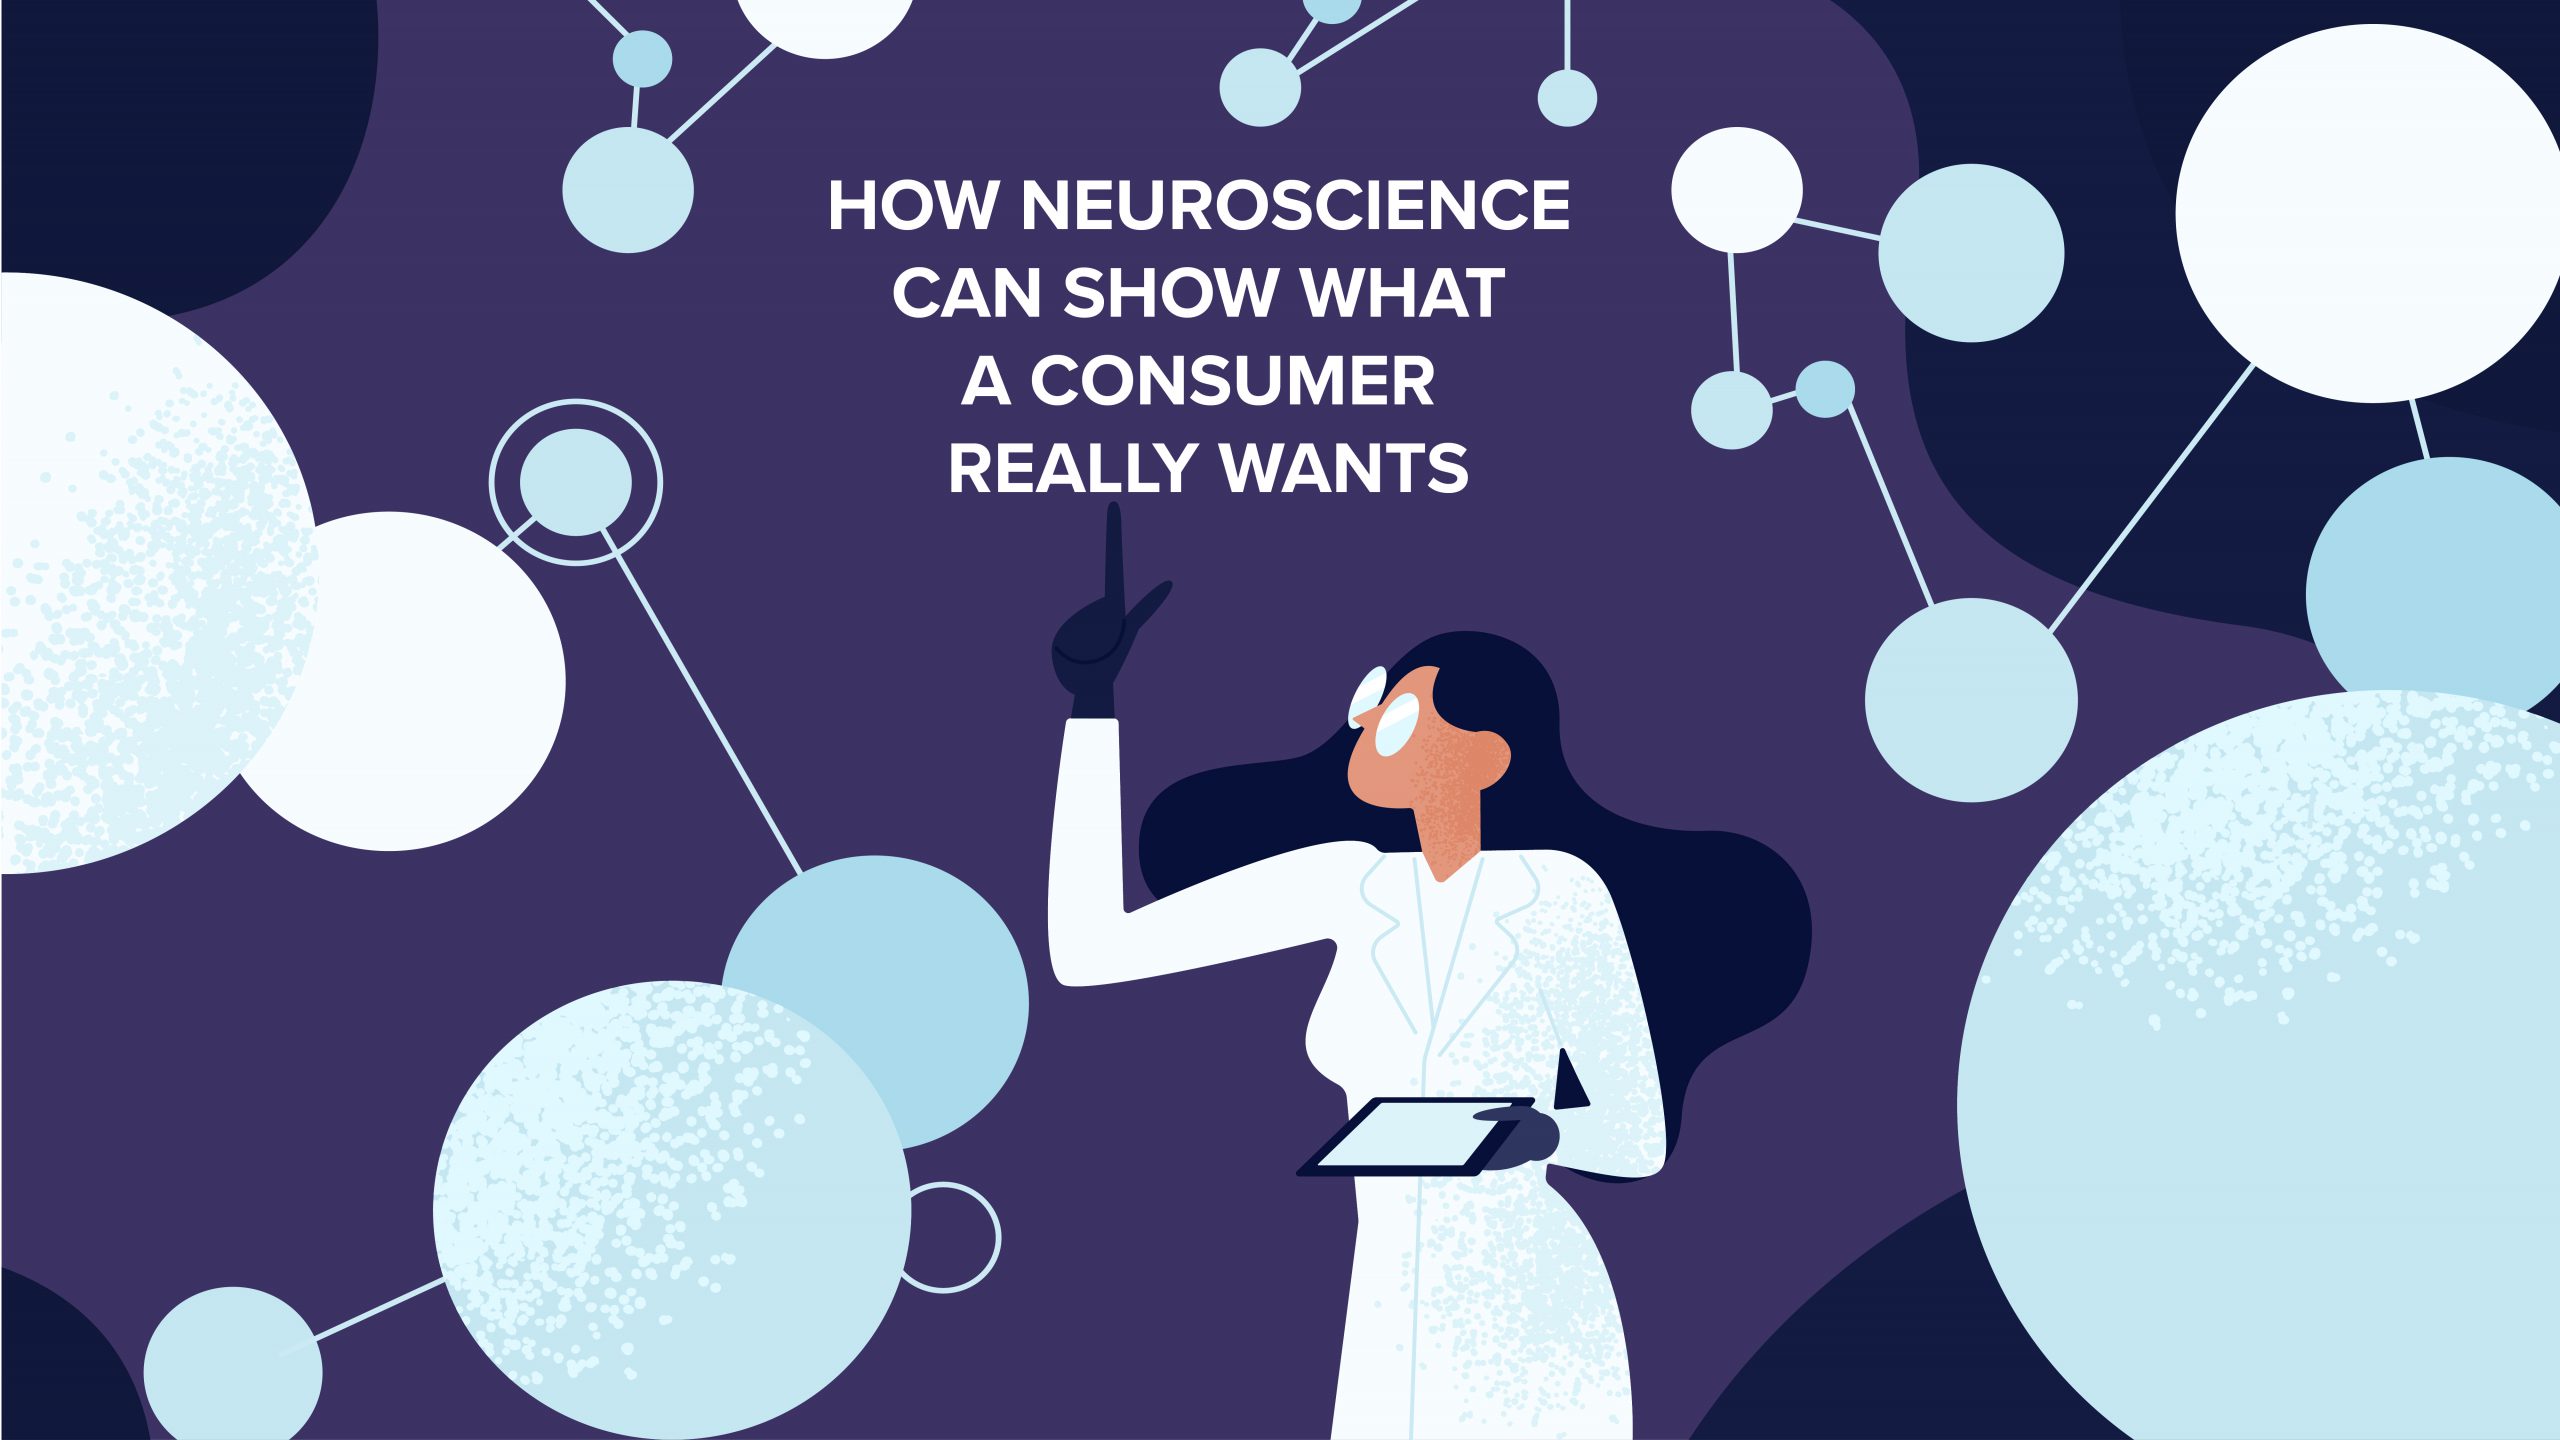 How neuroscience can show what a consumer really wants